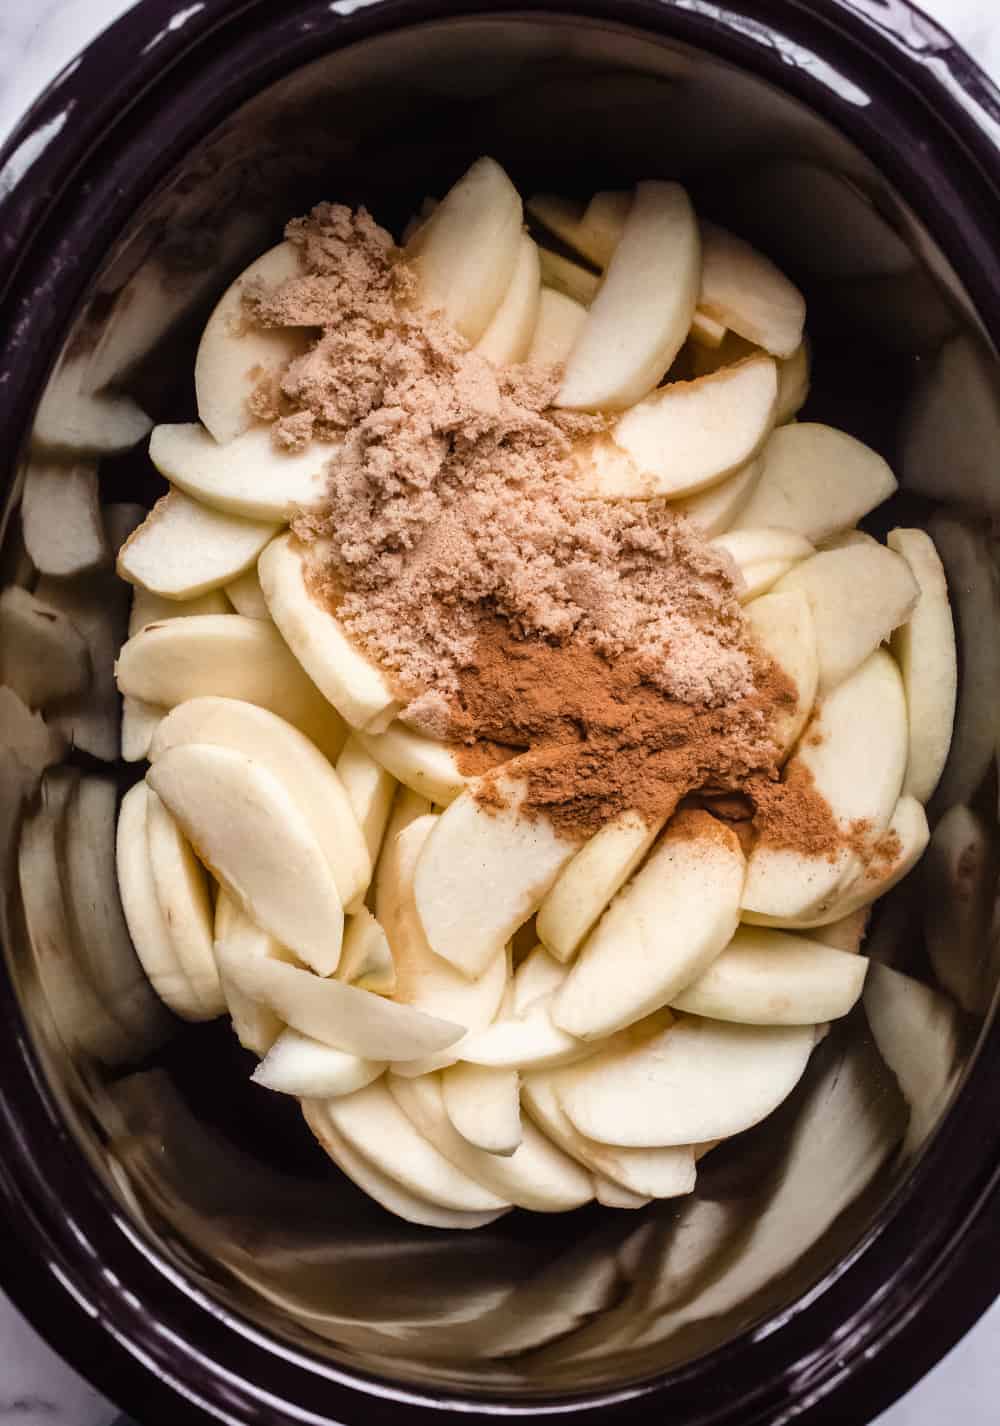 Sliced apples, brown sugar and apple pie spice in a slow cooker crock